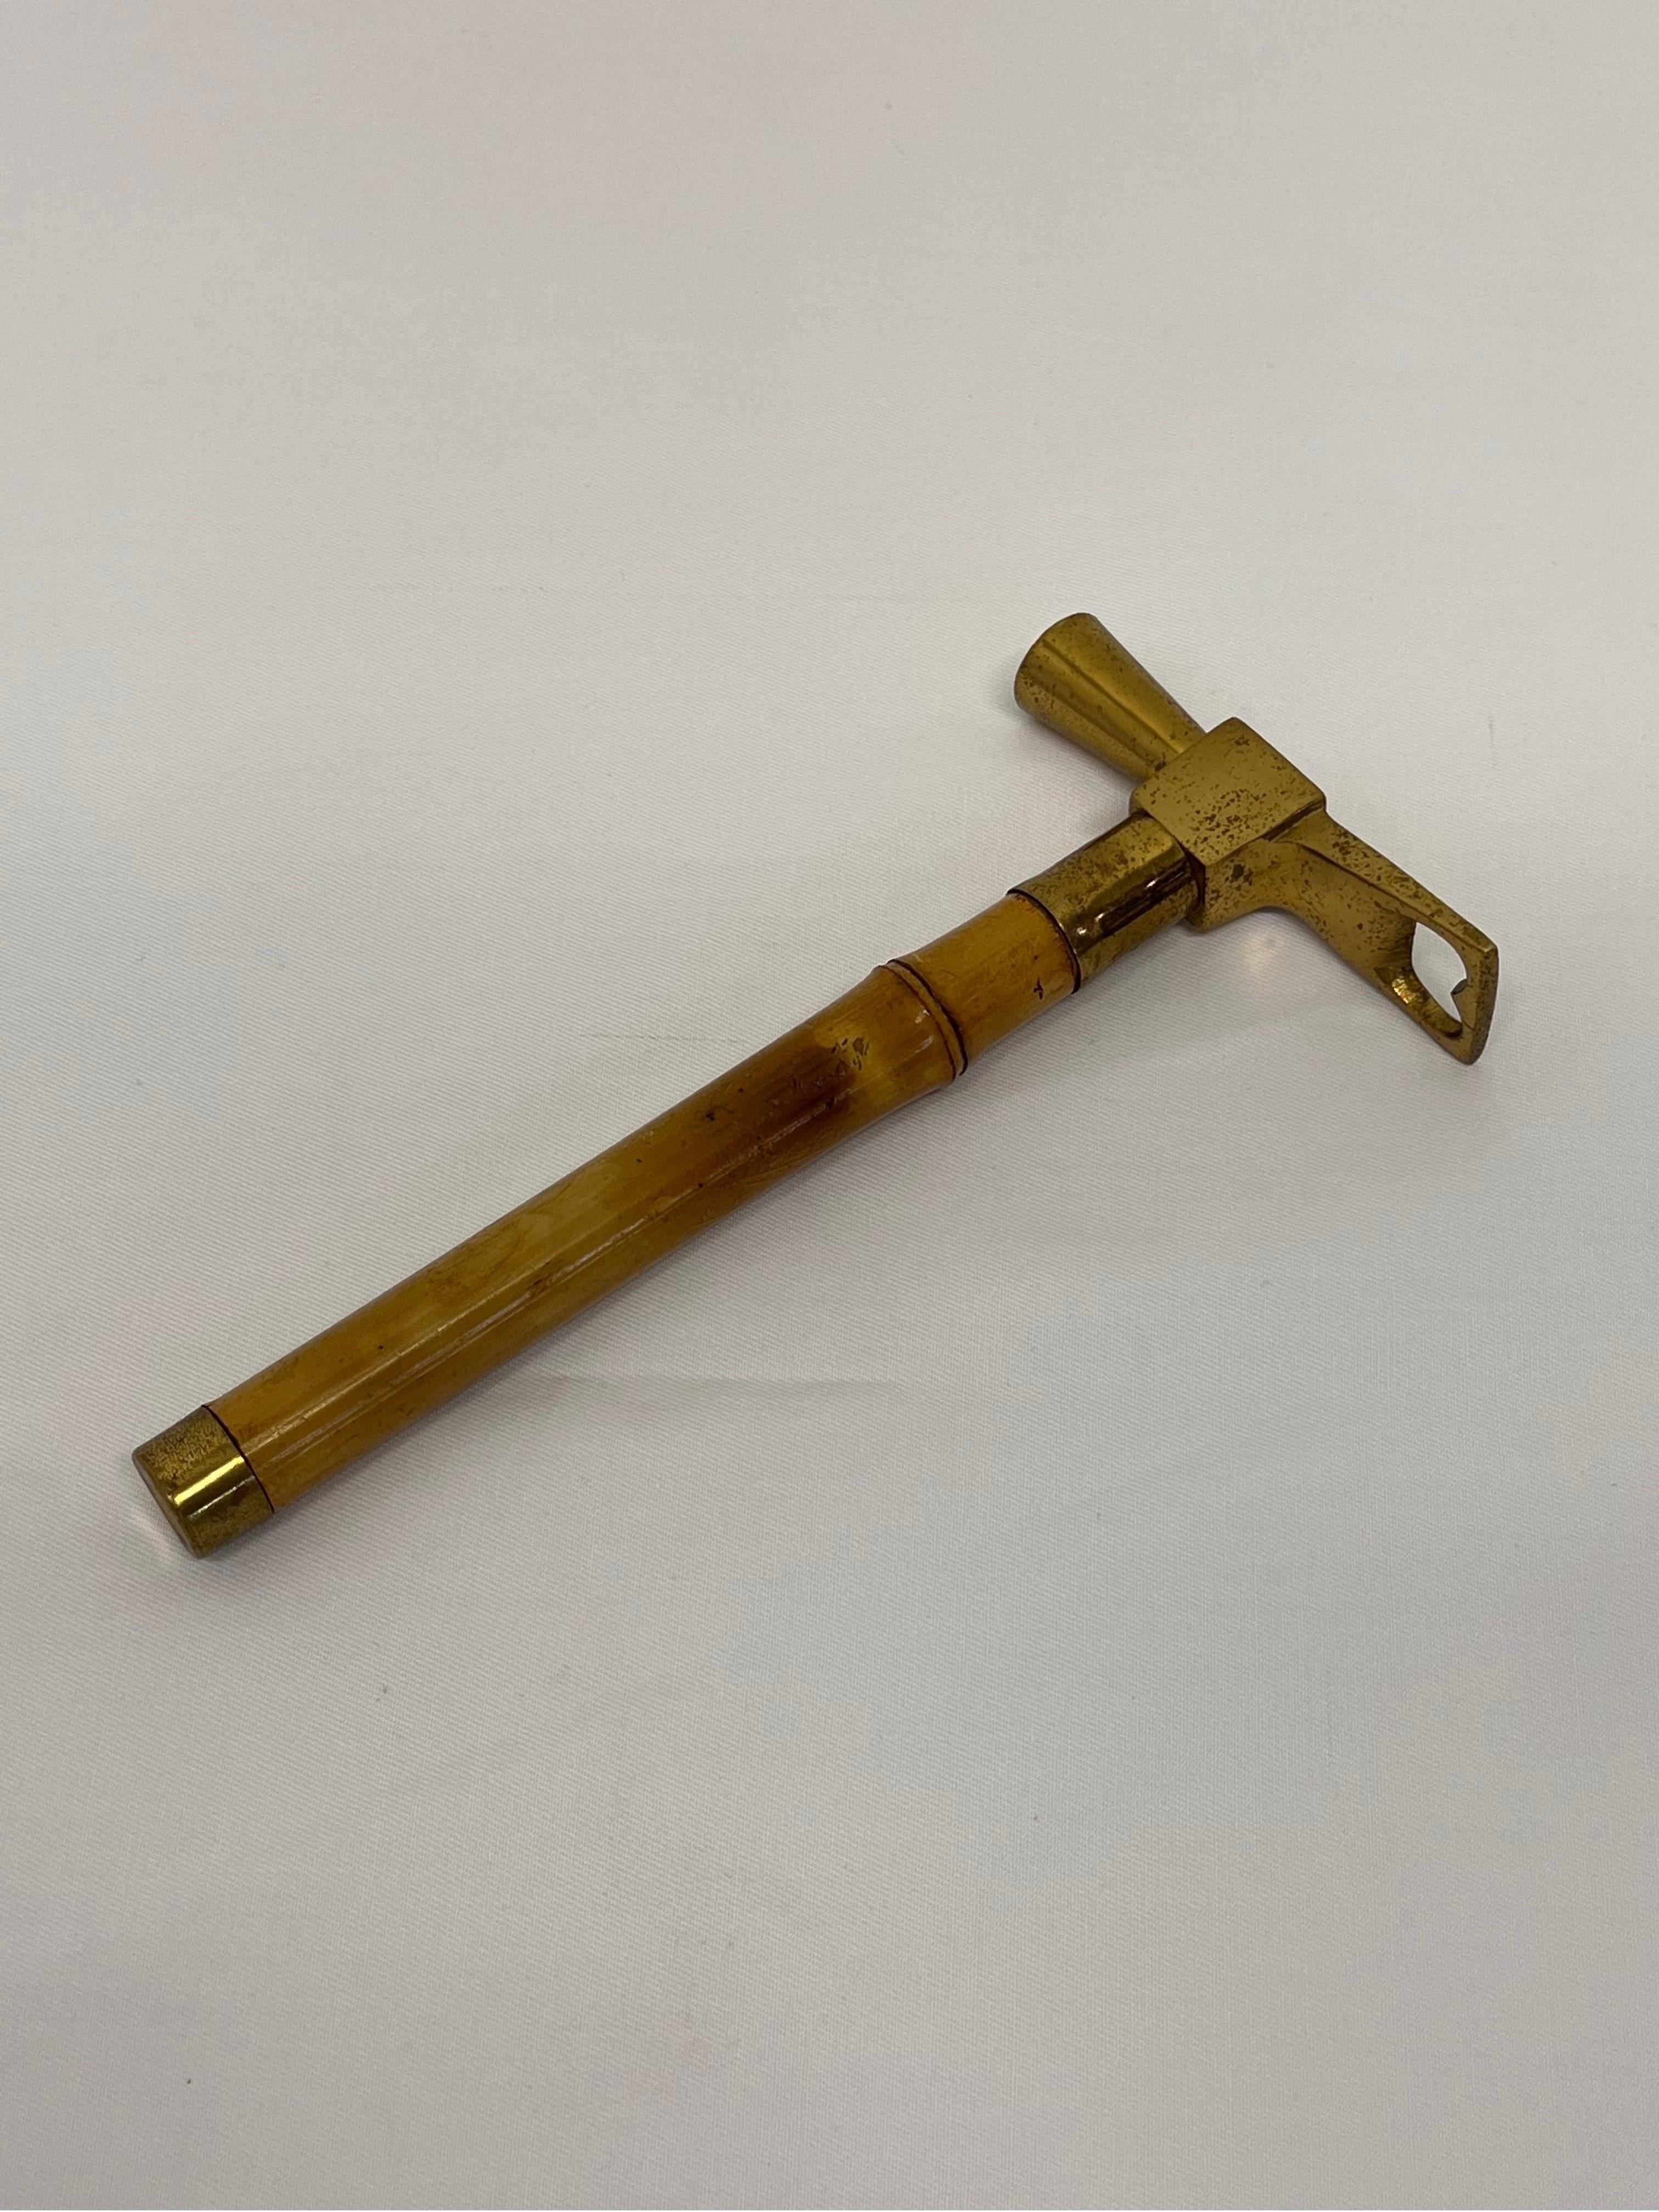 Brazilian modern bottle opener and ice hammer with hidden corkscrew for wine attached to a bamboo handle, 1950s.